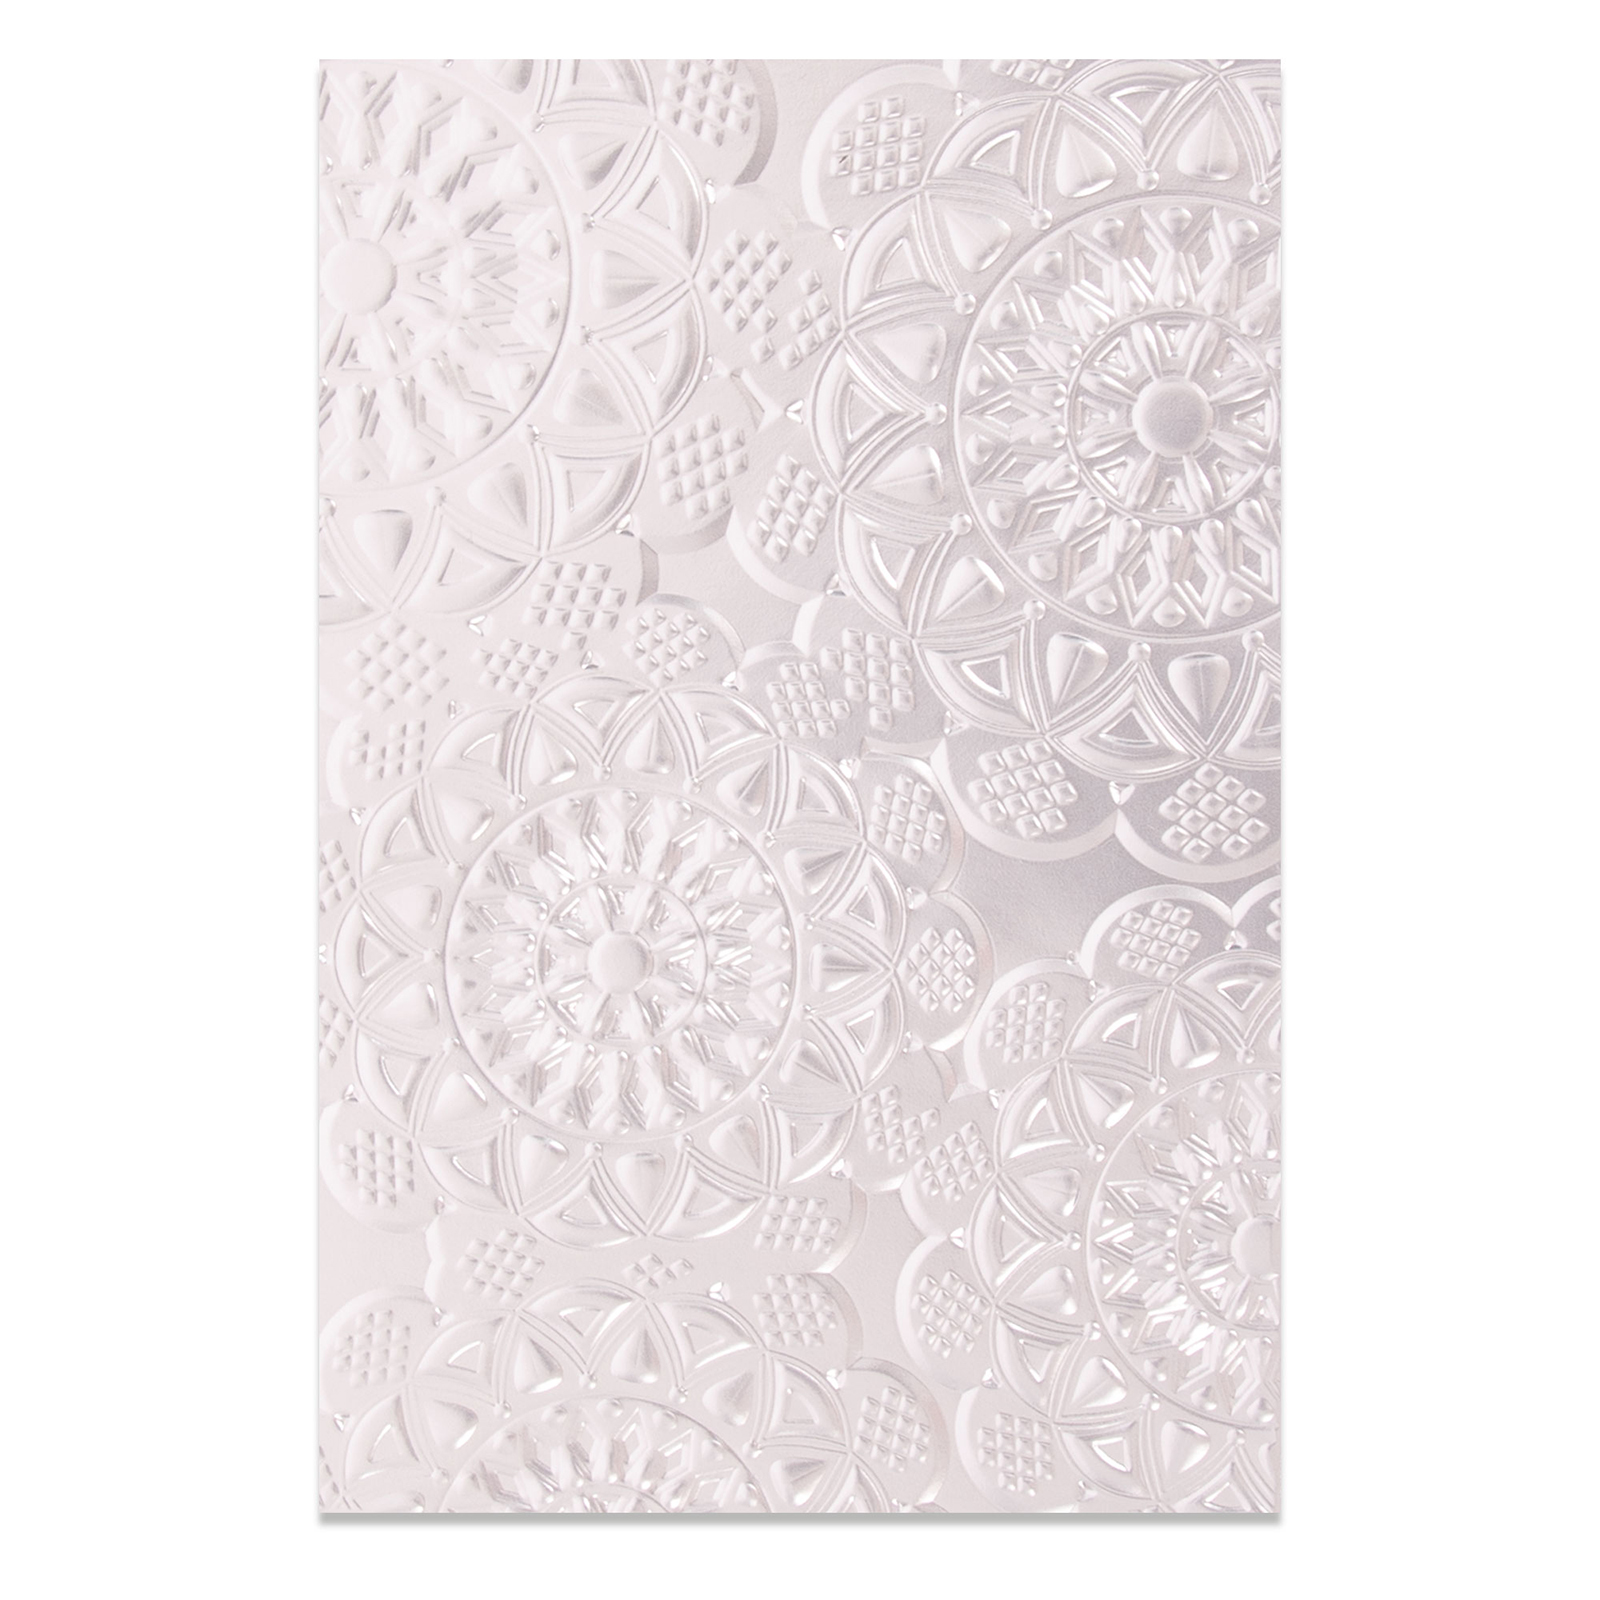 Sizzix • 3D Textured Impressions embossing sjabloon doily